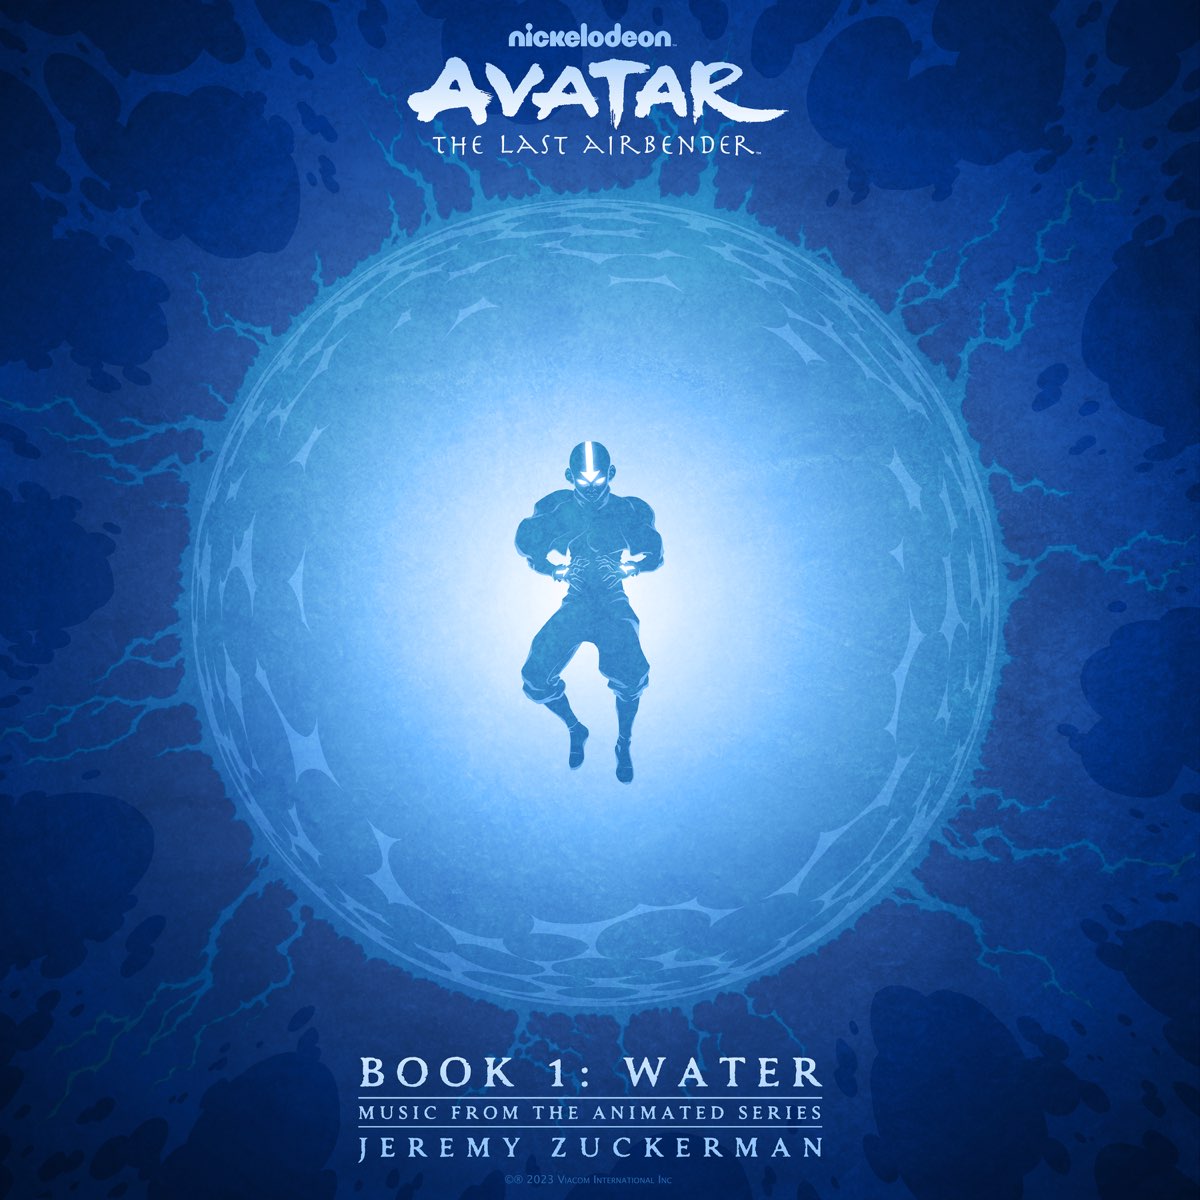 the last airbender book 1